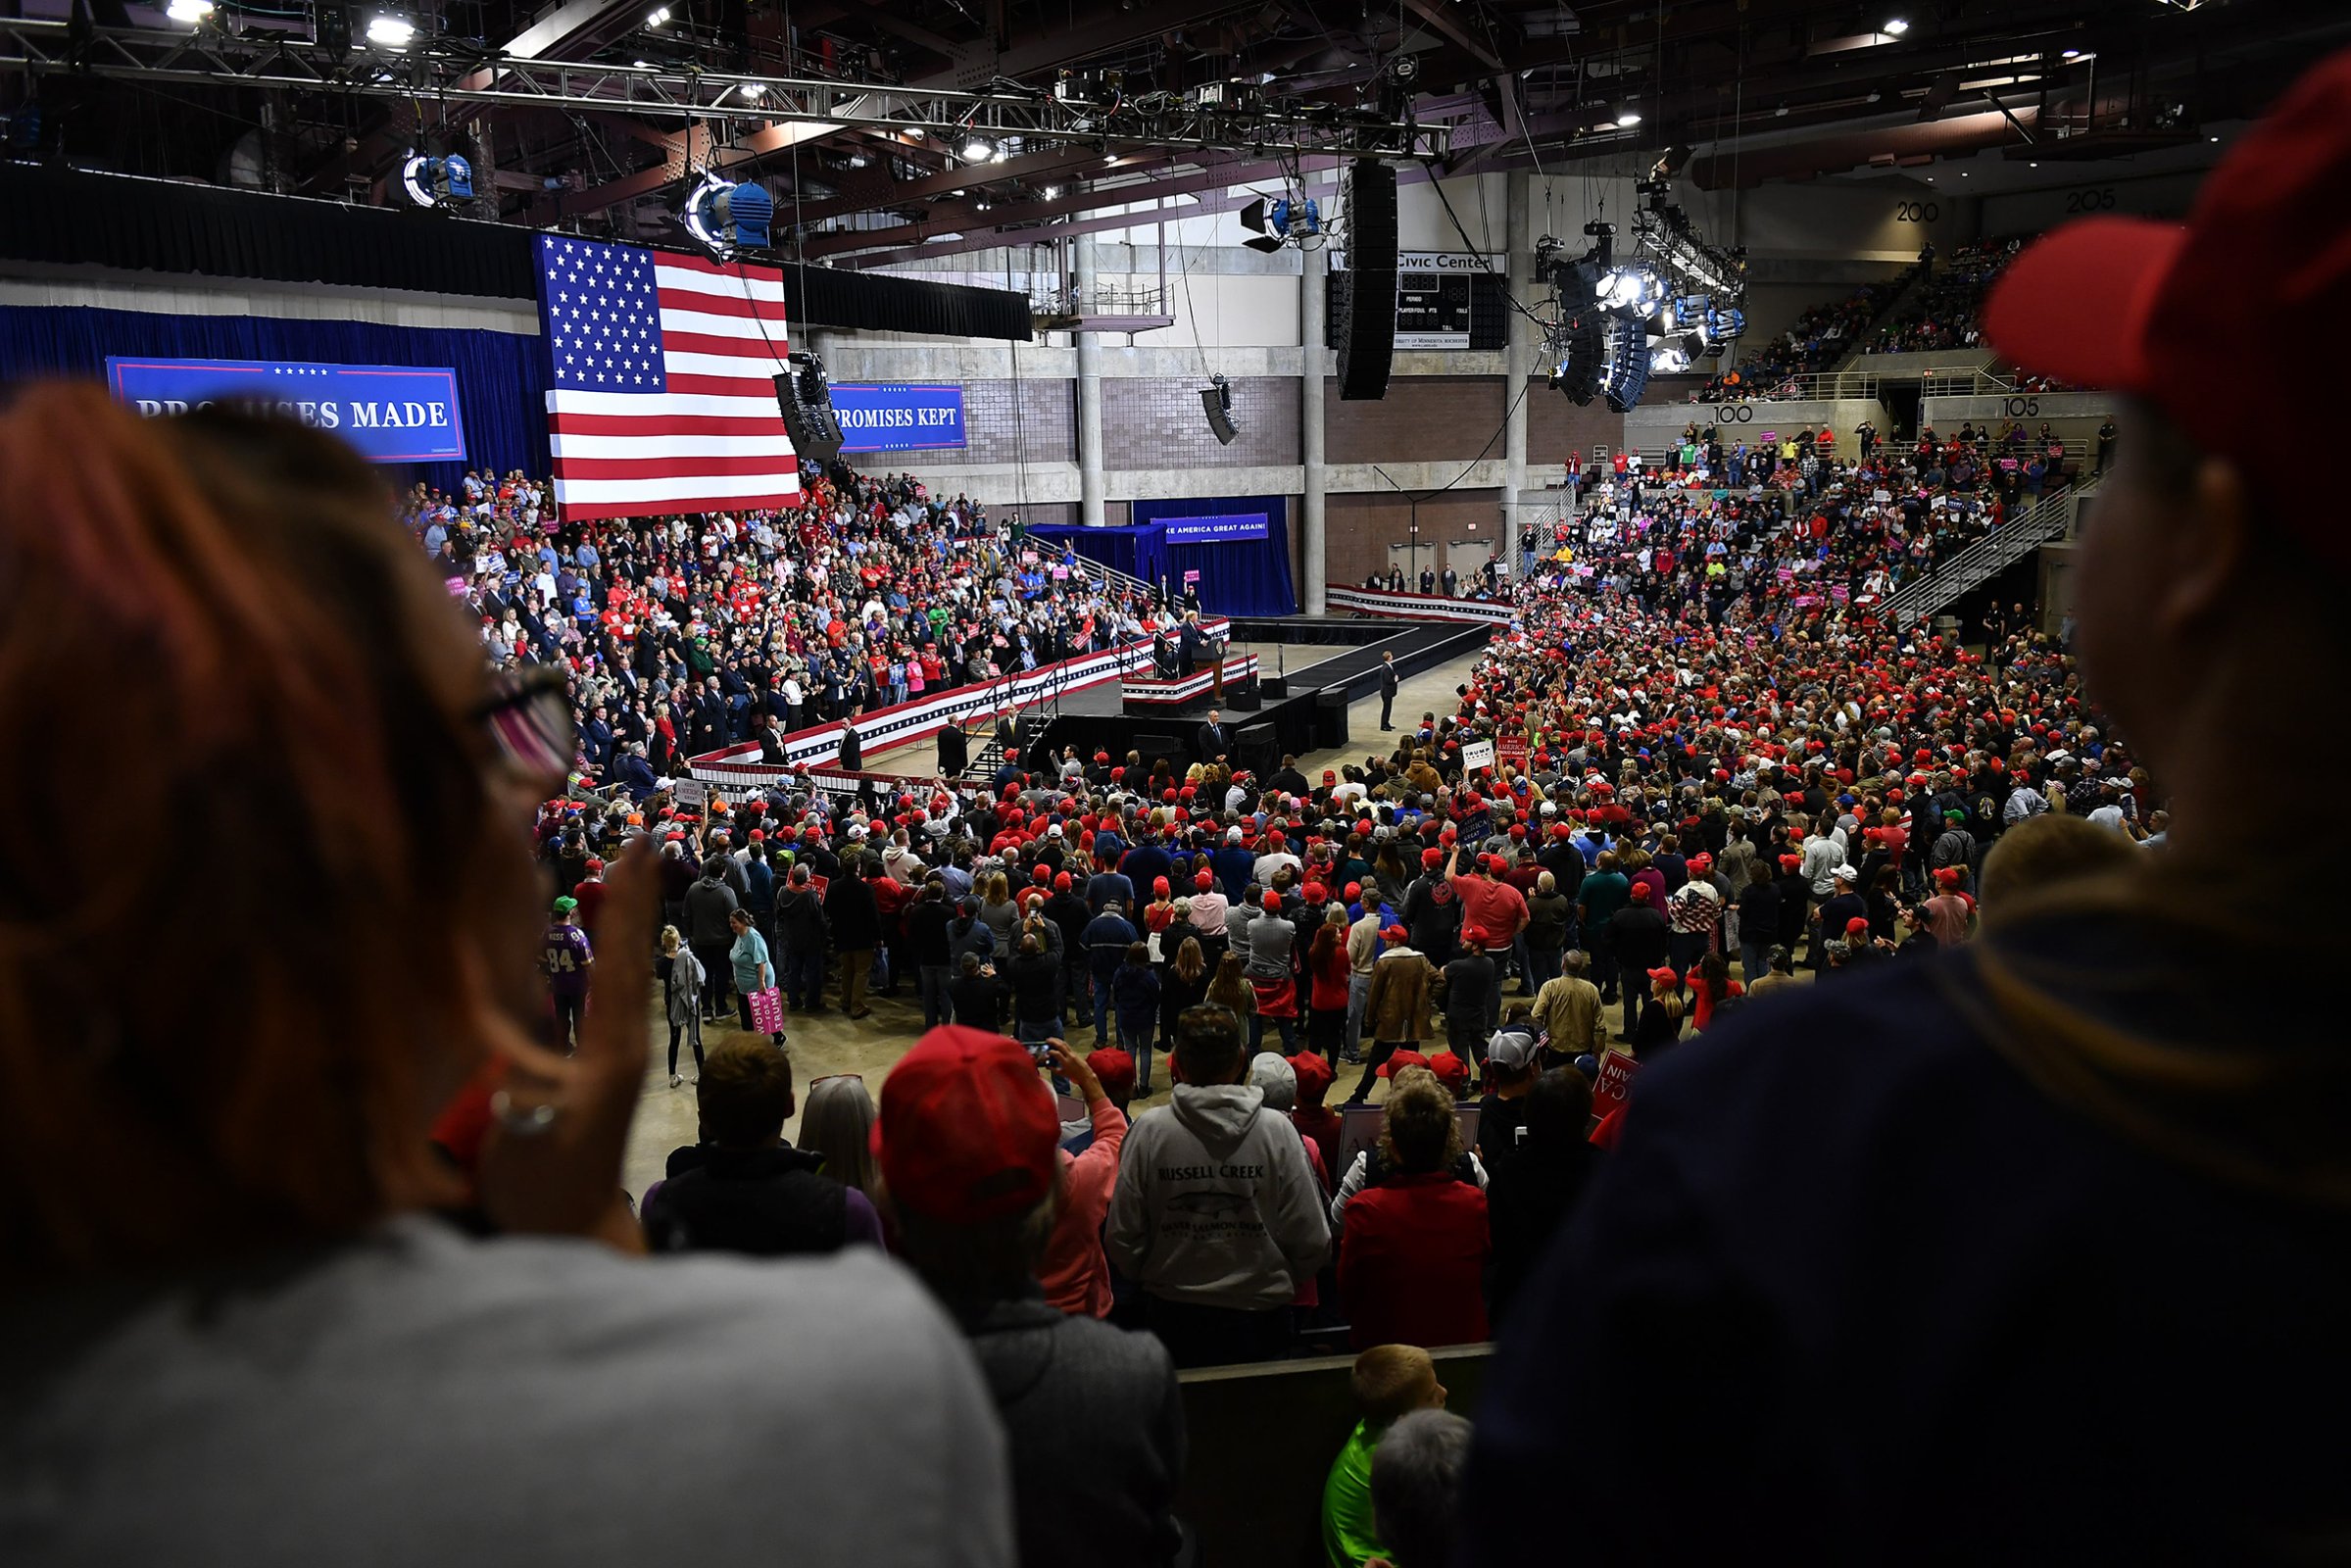 President Donald Trump speaks at a rally in the Mayo Civic Center in Rochester, Minn. on Oct. 4, 2018.